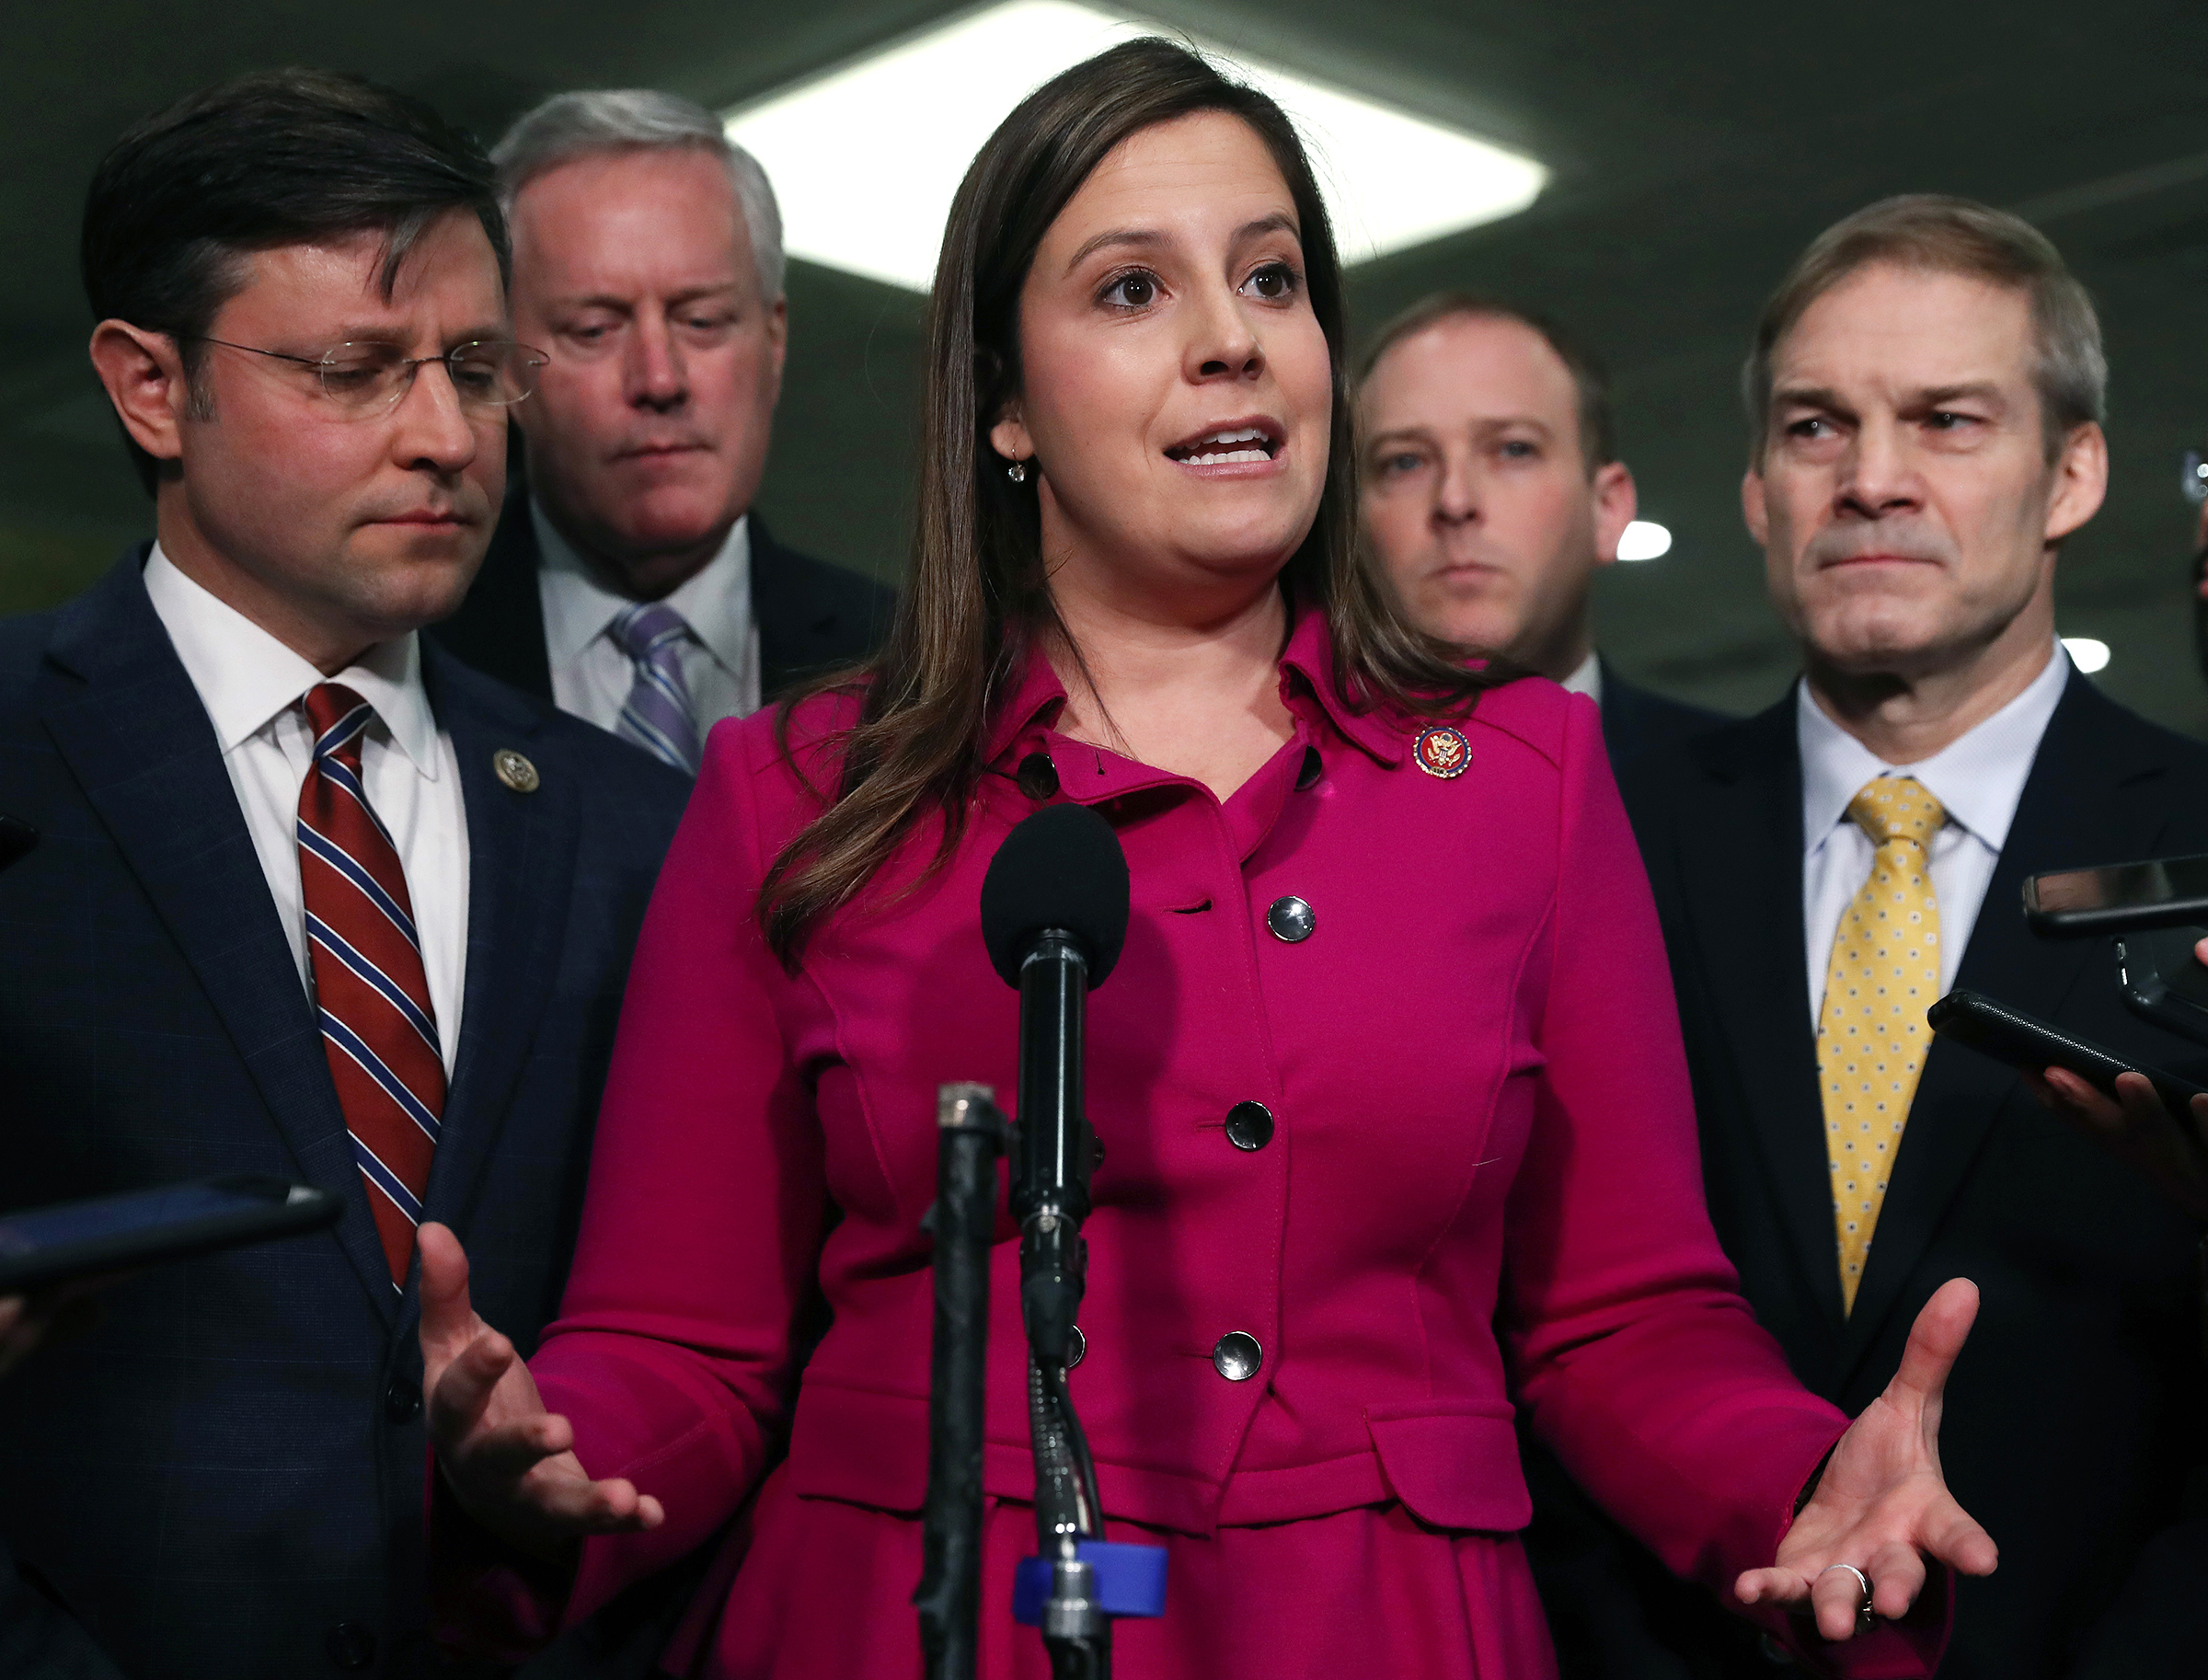 Rep. Elise Stefanik speaks with reporters in the Senate subway before the impeachment trial of former President Donald Trump resumes at the U.S. Capitol on Jan. 23, 2020. Surrounding Stefanik, from left to right: Rep. Mike Johnson (R-LA), Rep. Mark Meadows (R-NC), Rep. Lee Zeldin (R-NY), and Rep. Jim Jordan (R-OH). (Mark Wilson—Getty Images)